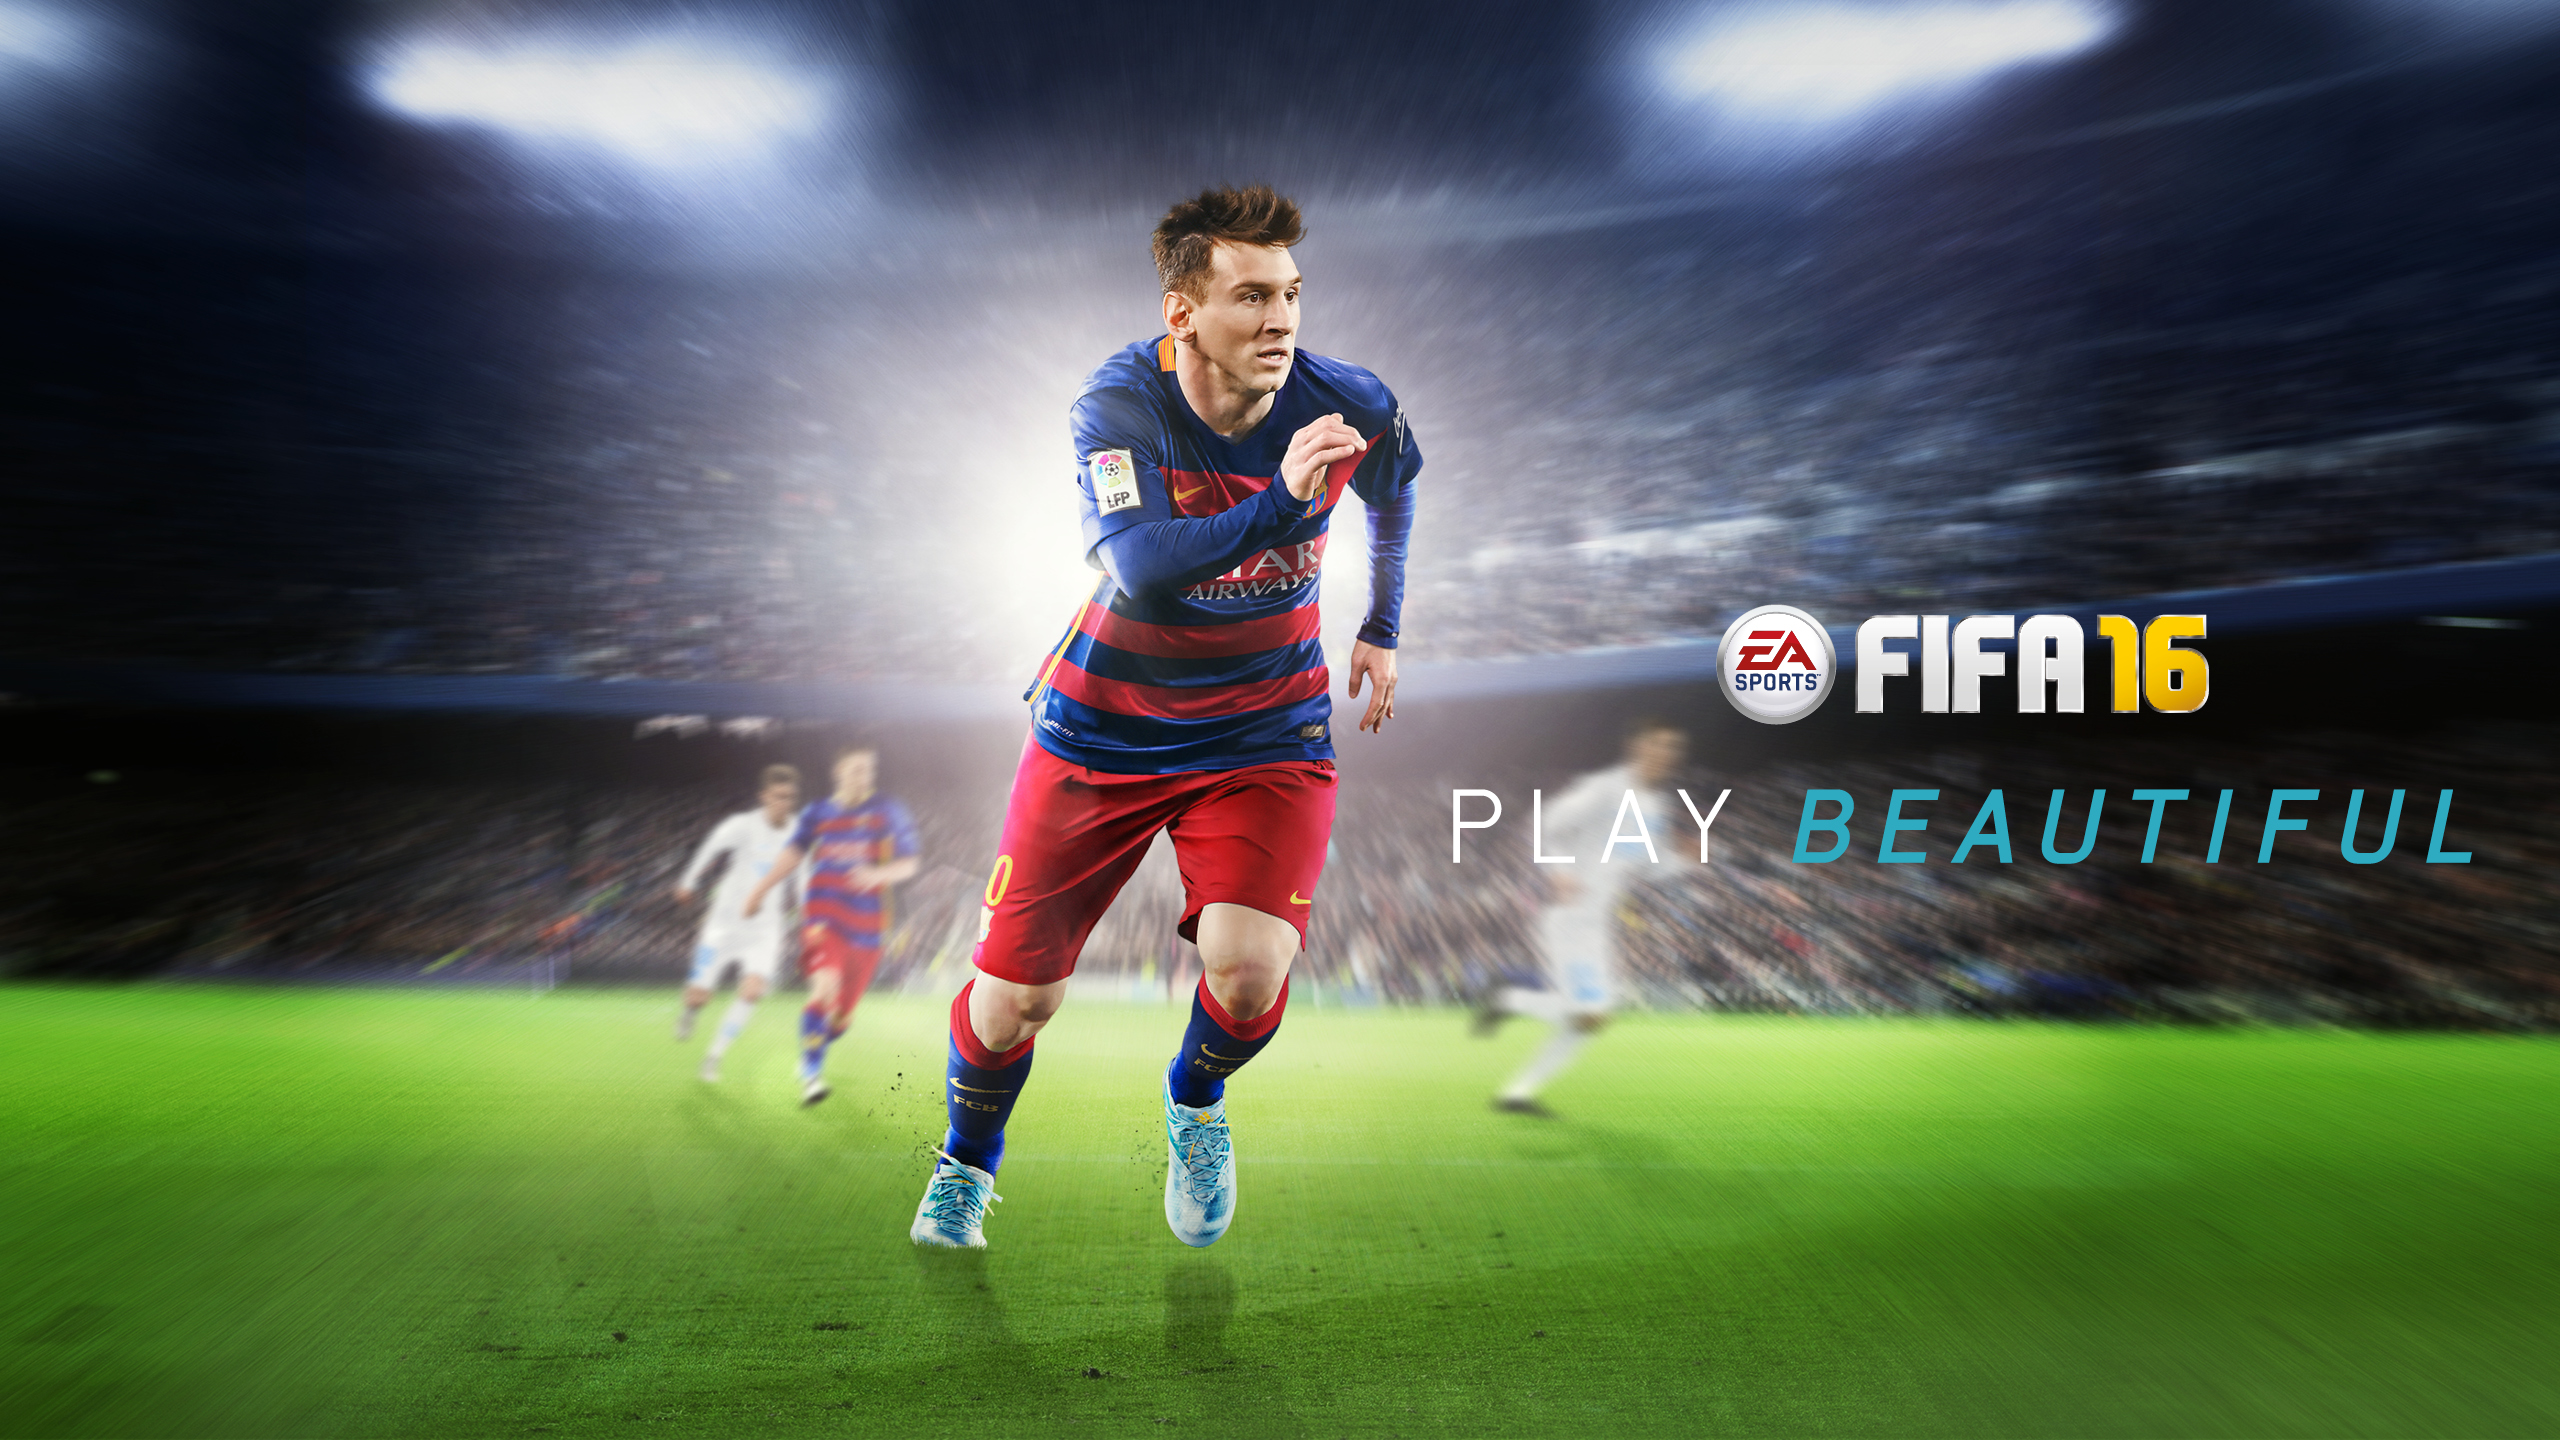 FIFA 16 Game Wallpapers HD Wallpapers